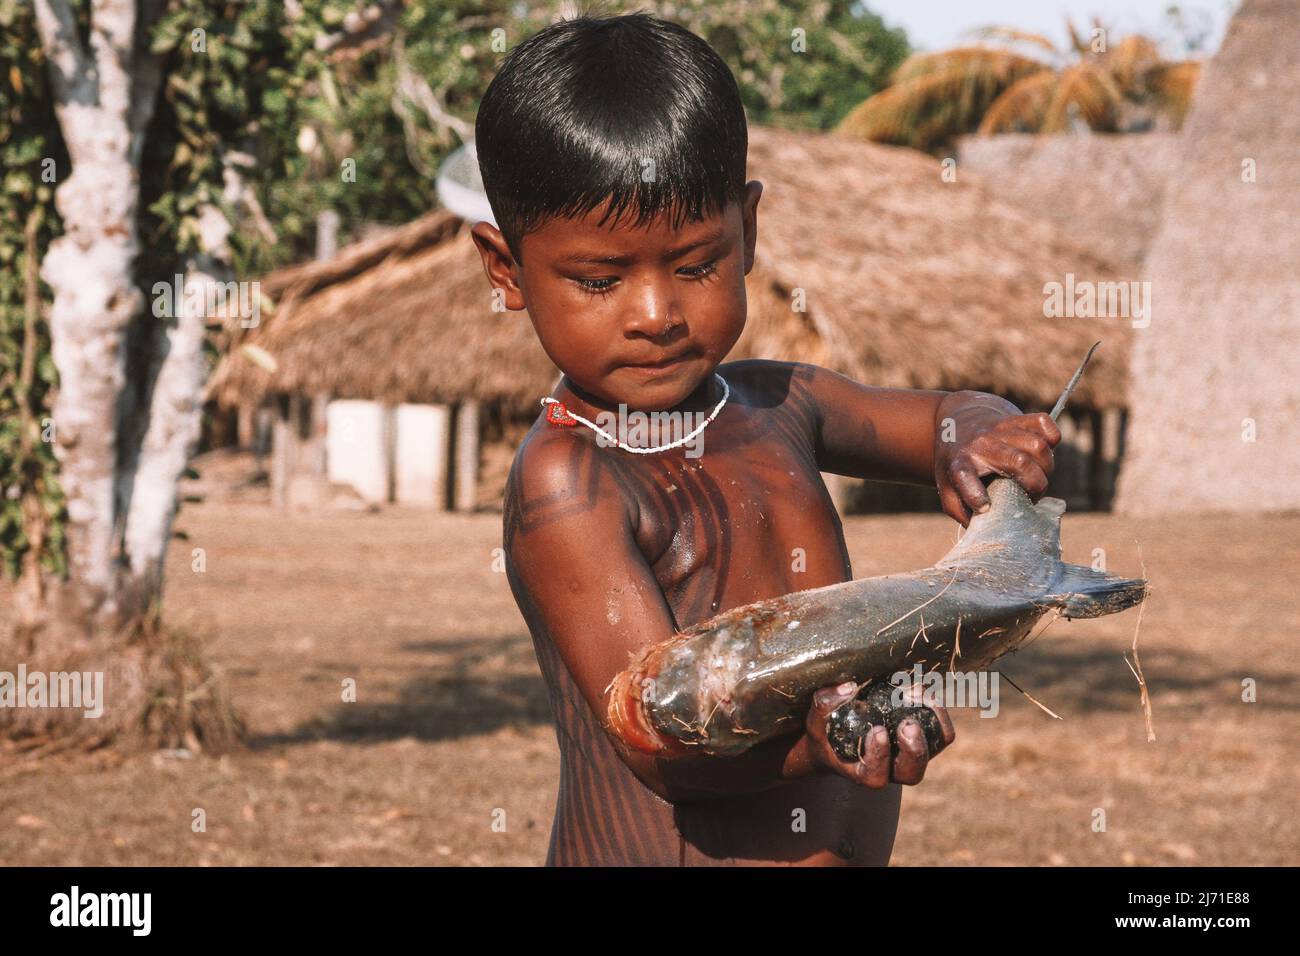 Indian child from the Asurini tribe in the Brazilian Amazon, holding a fish with his little hands. Stock Photo